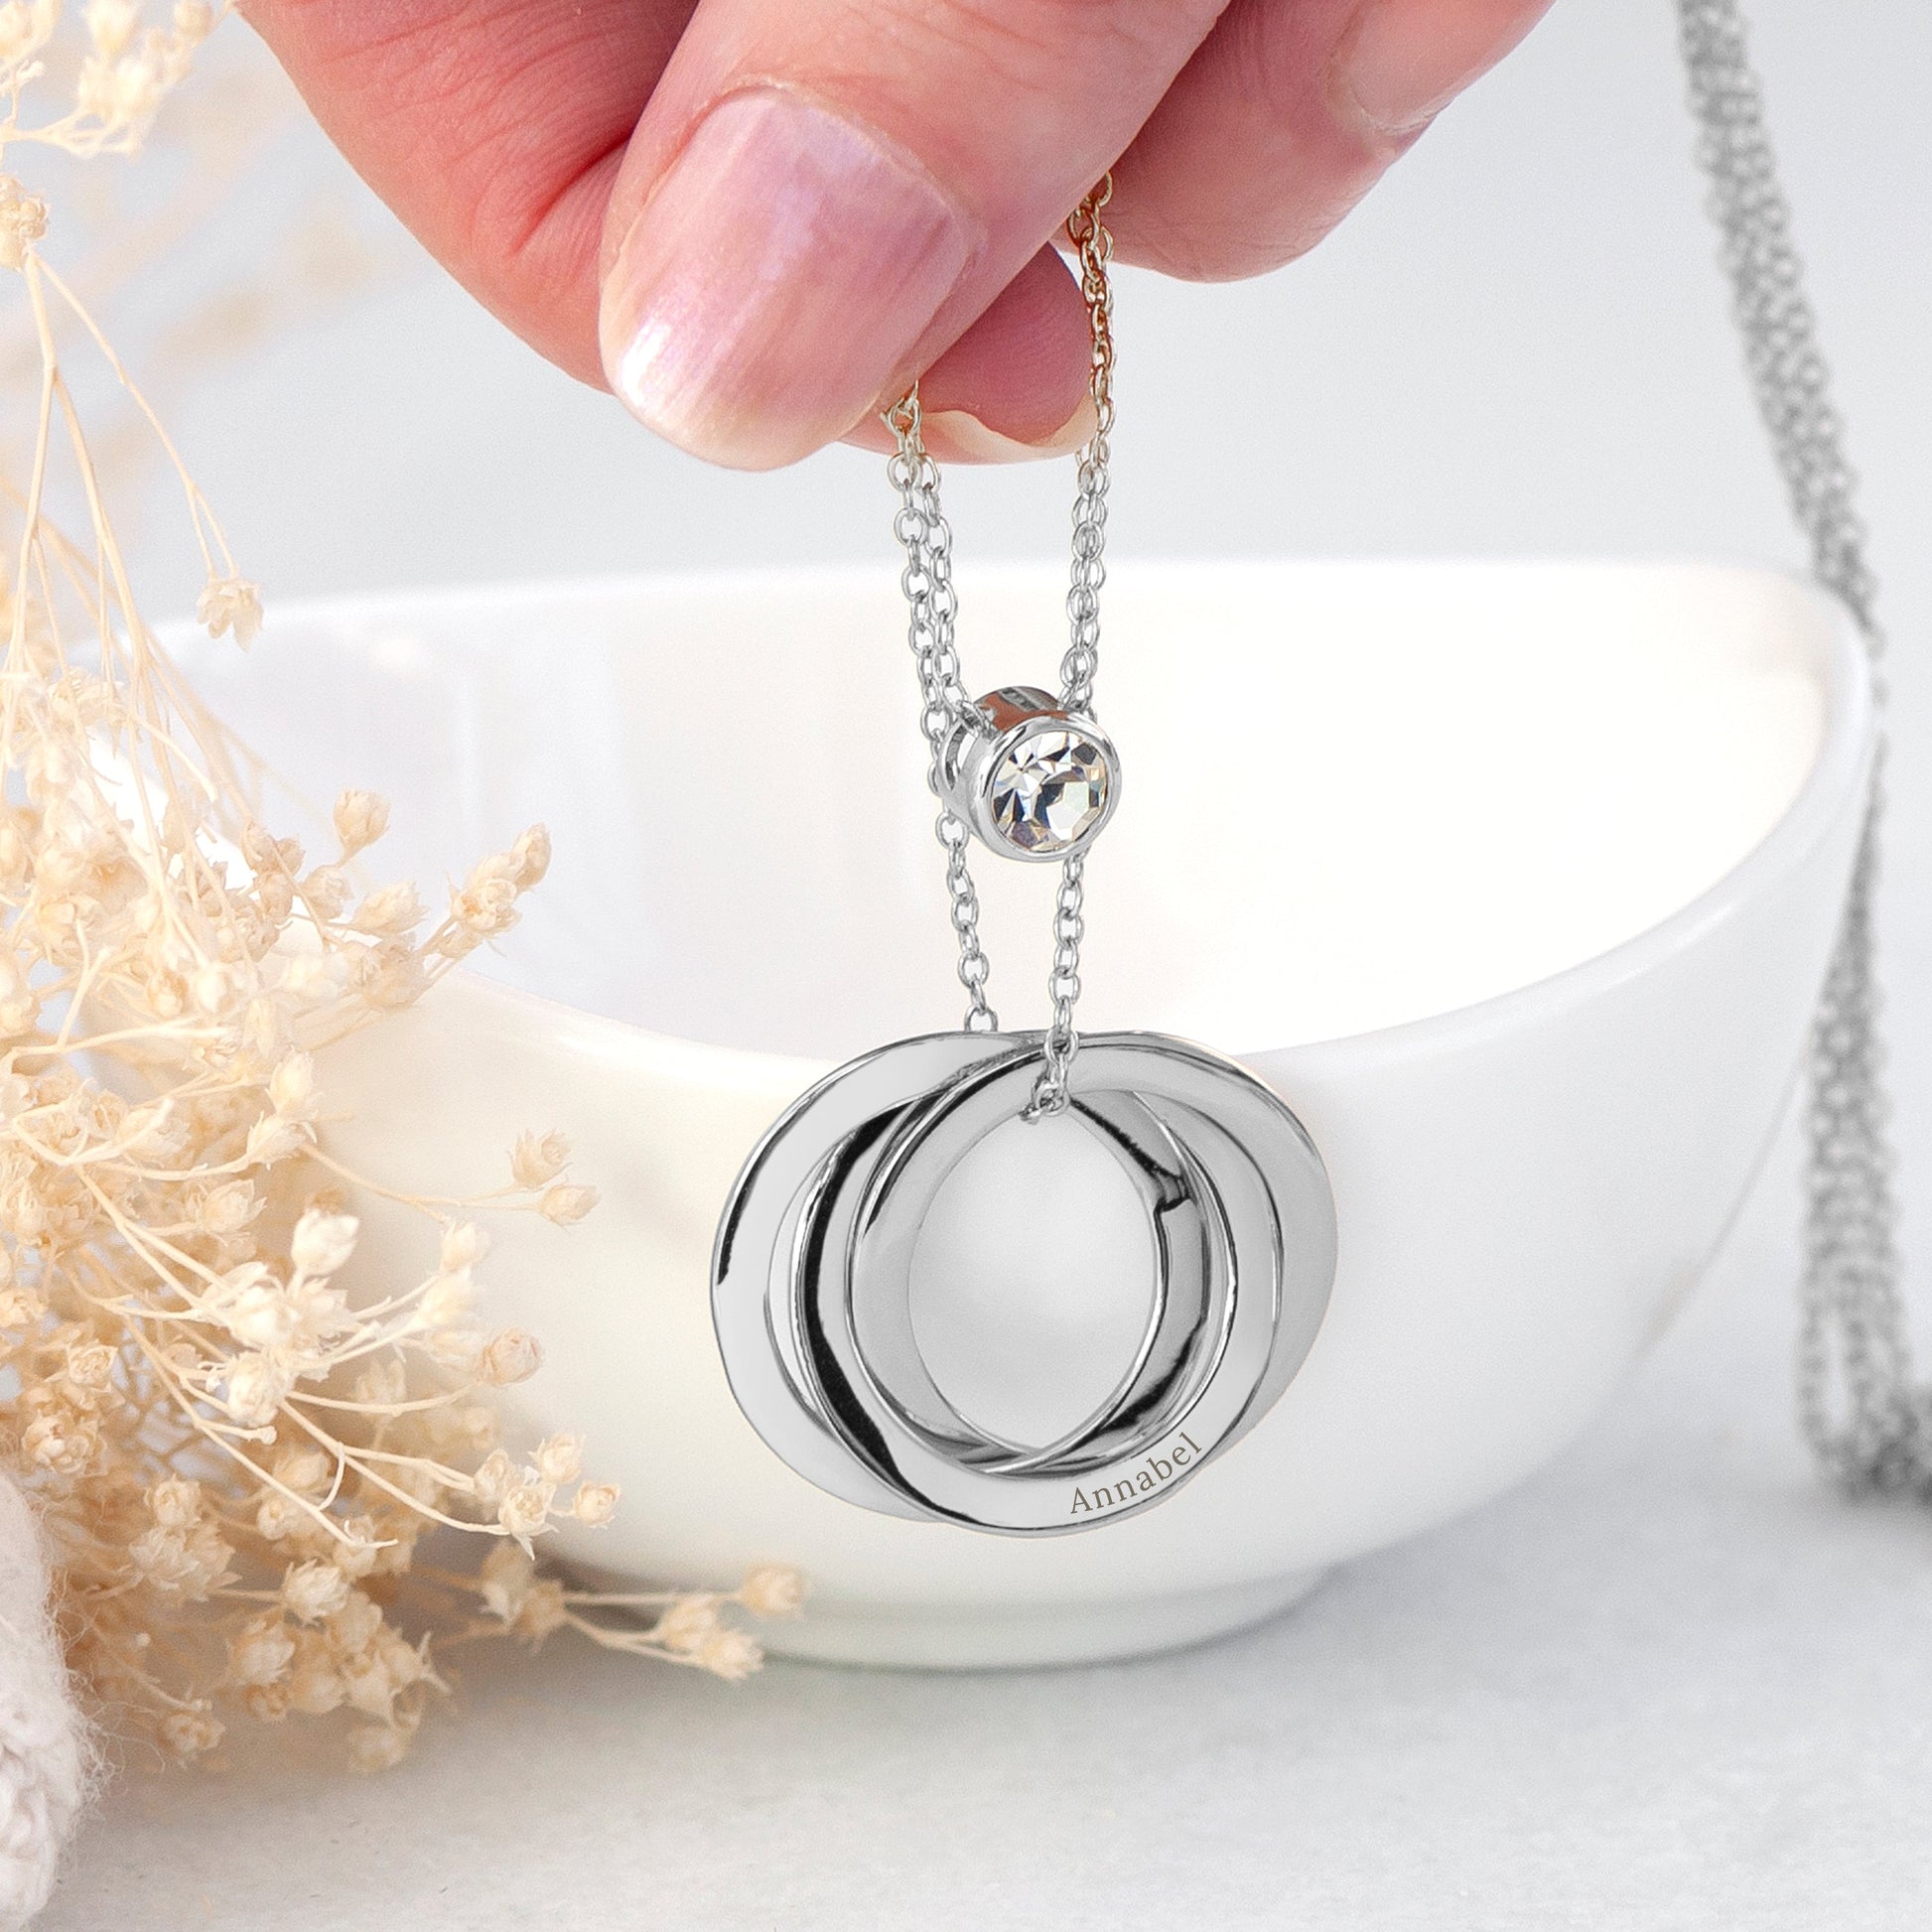 Personalized Necklaces - Personalized Russian Ring Layered Necklace 